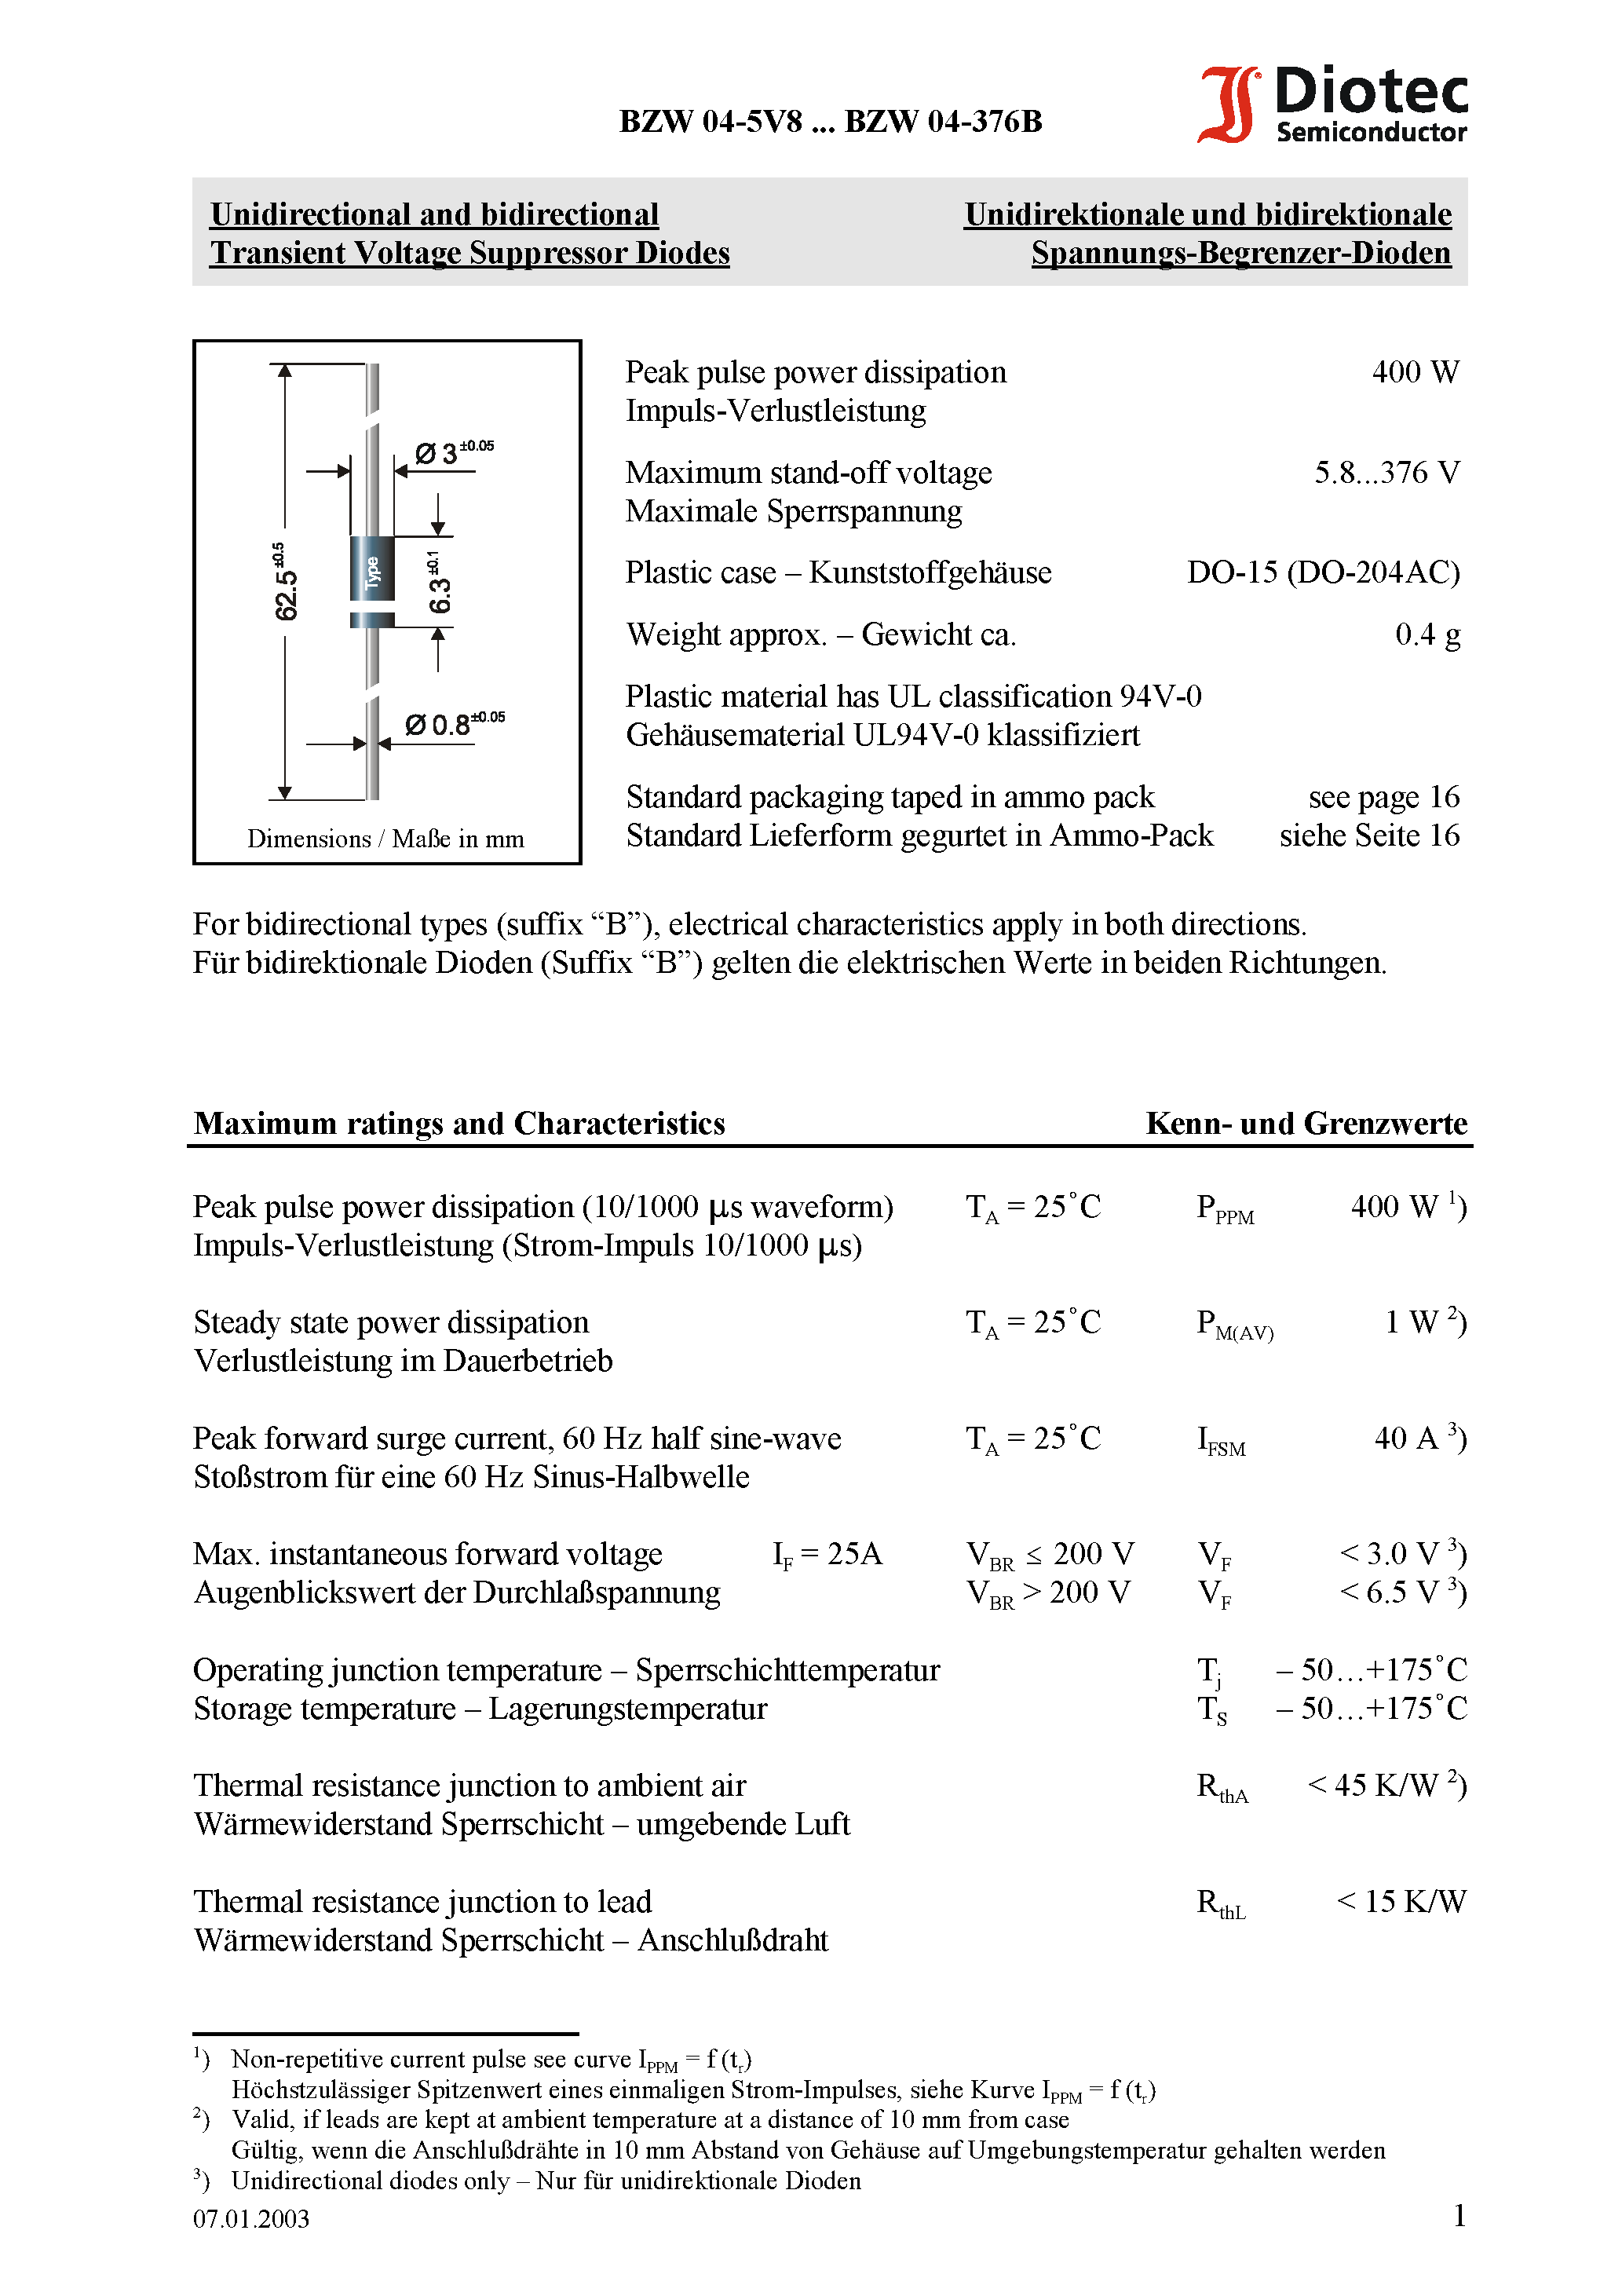 Datasheet BZW04-10 - Unidirectional and bidirectional Transient Voltage Suppressor Diodes page 1